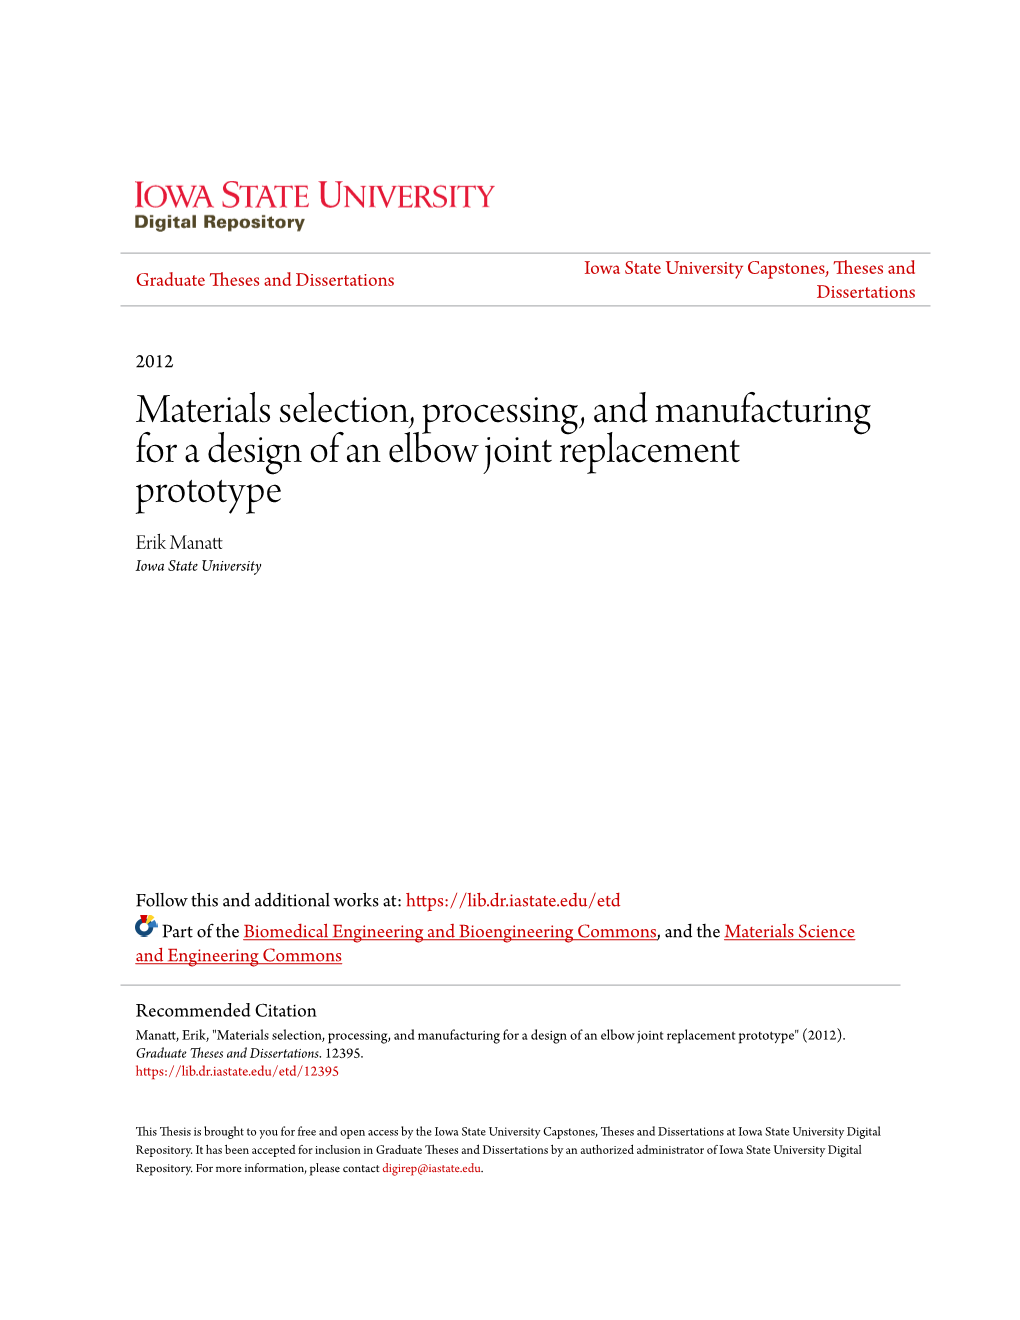 Materials Selection, Processing, and Manufacturing for a Design of an Elbow Joint Replacement Prototype Erik Manatt Iowa State University